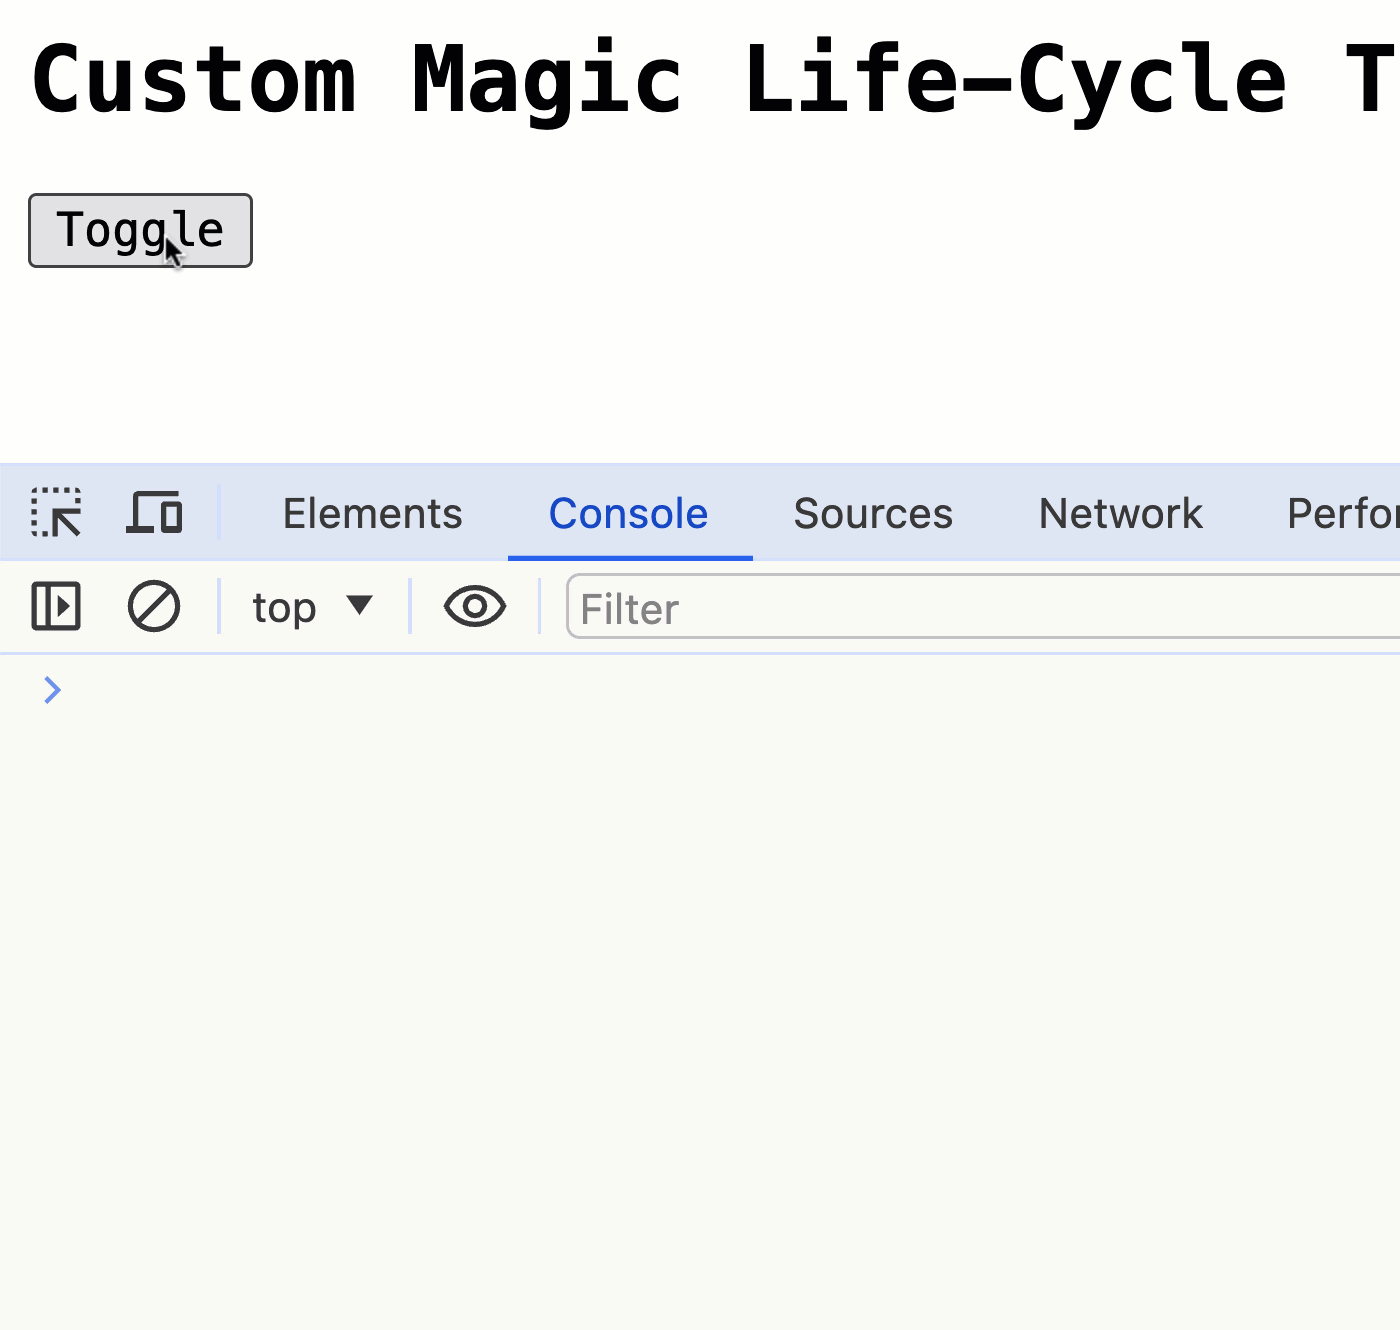 Console logging for kablamo magic shows that the setup method is called for every single instance in the DOM.